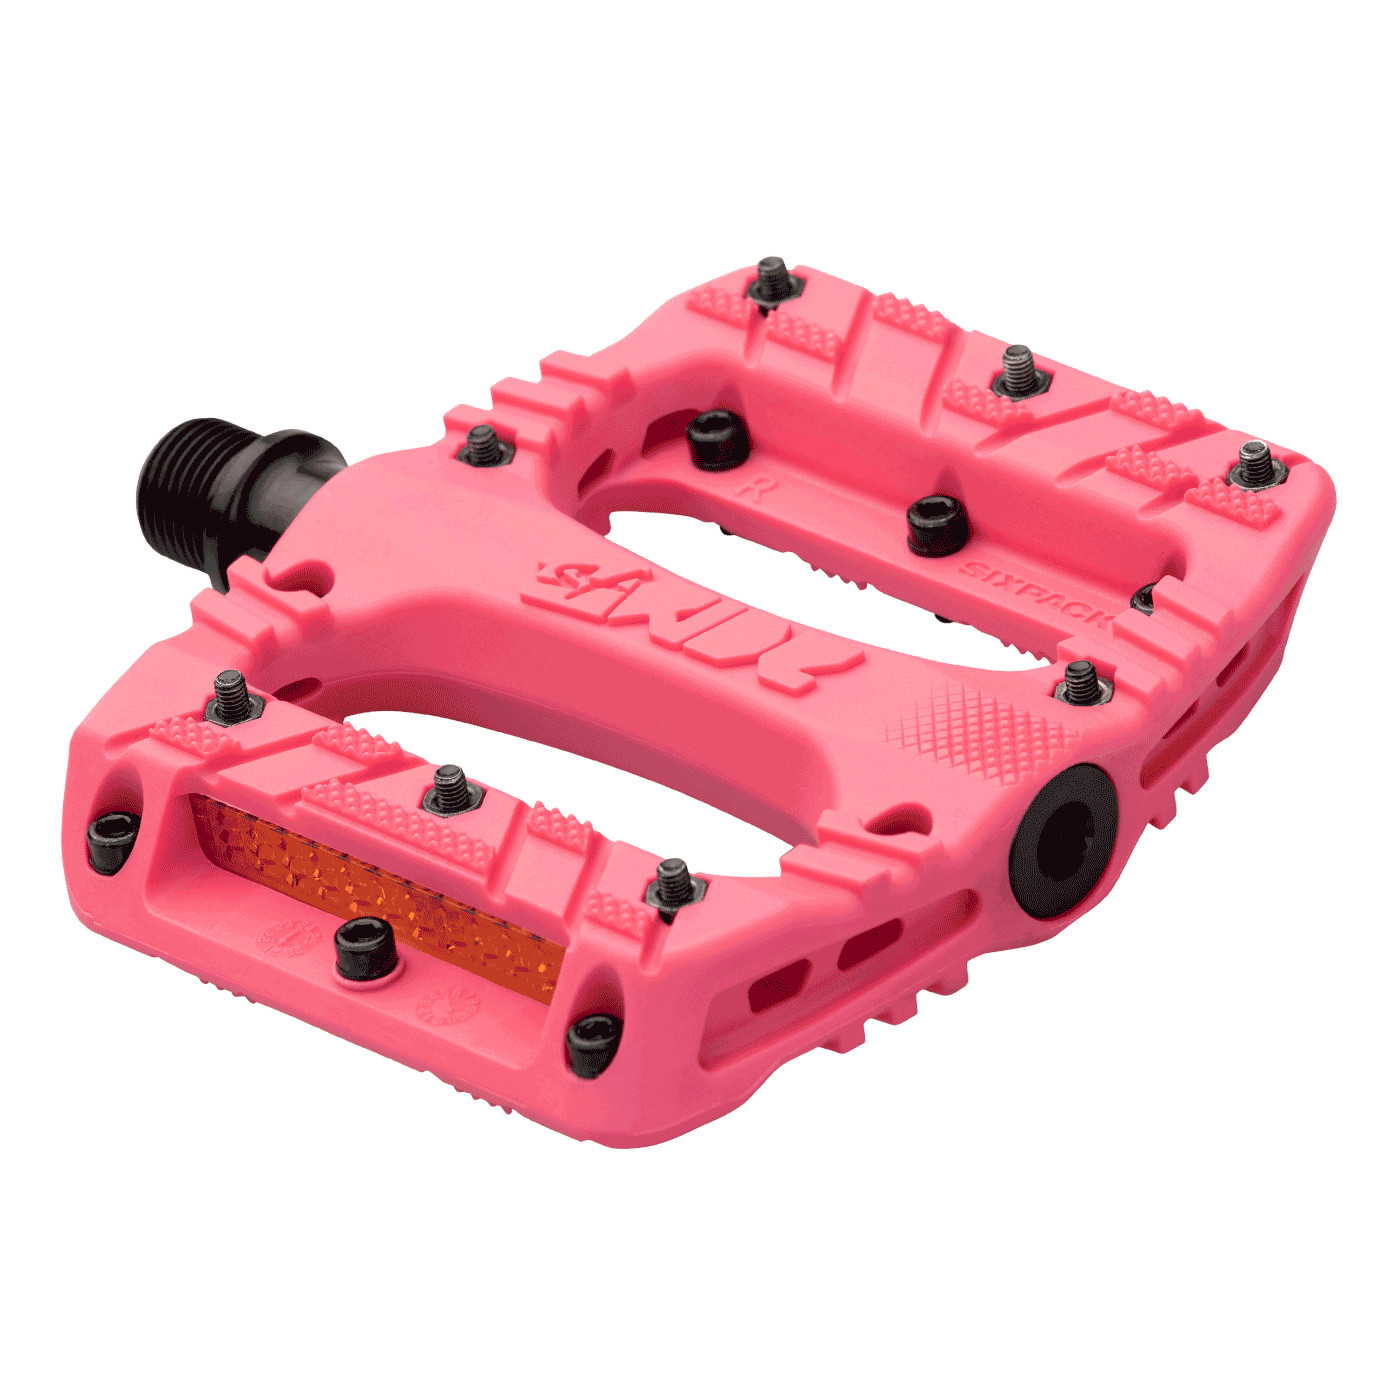 Picture of Sixpack 1st Ride Flat Pedals - Raspberry pink